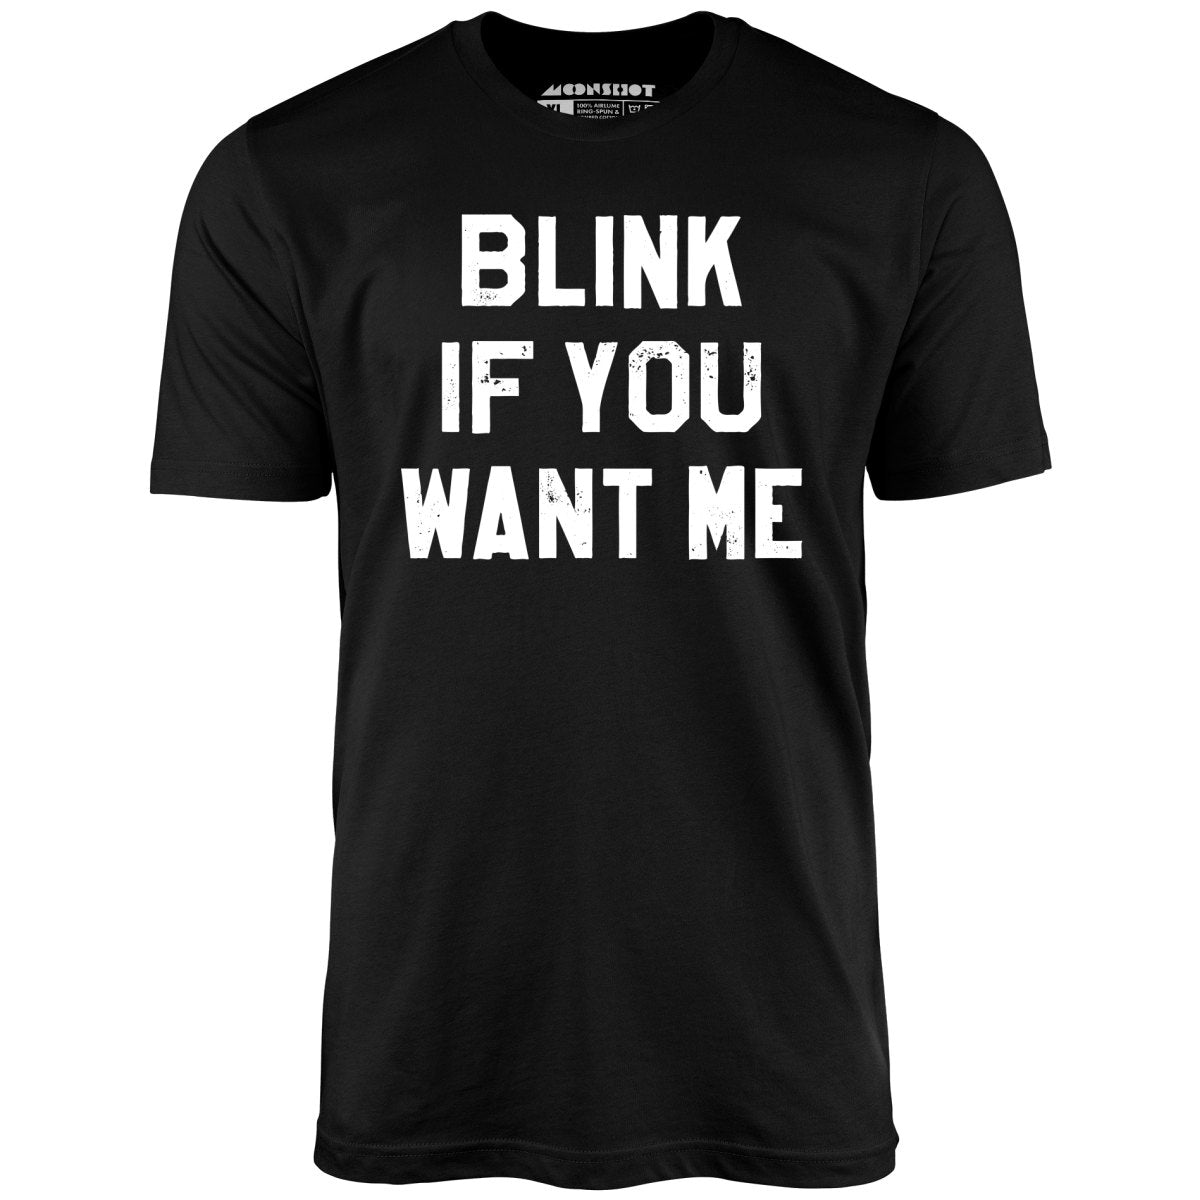 Blink If You Want Me - Unisex T-Shirt